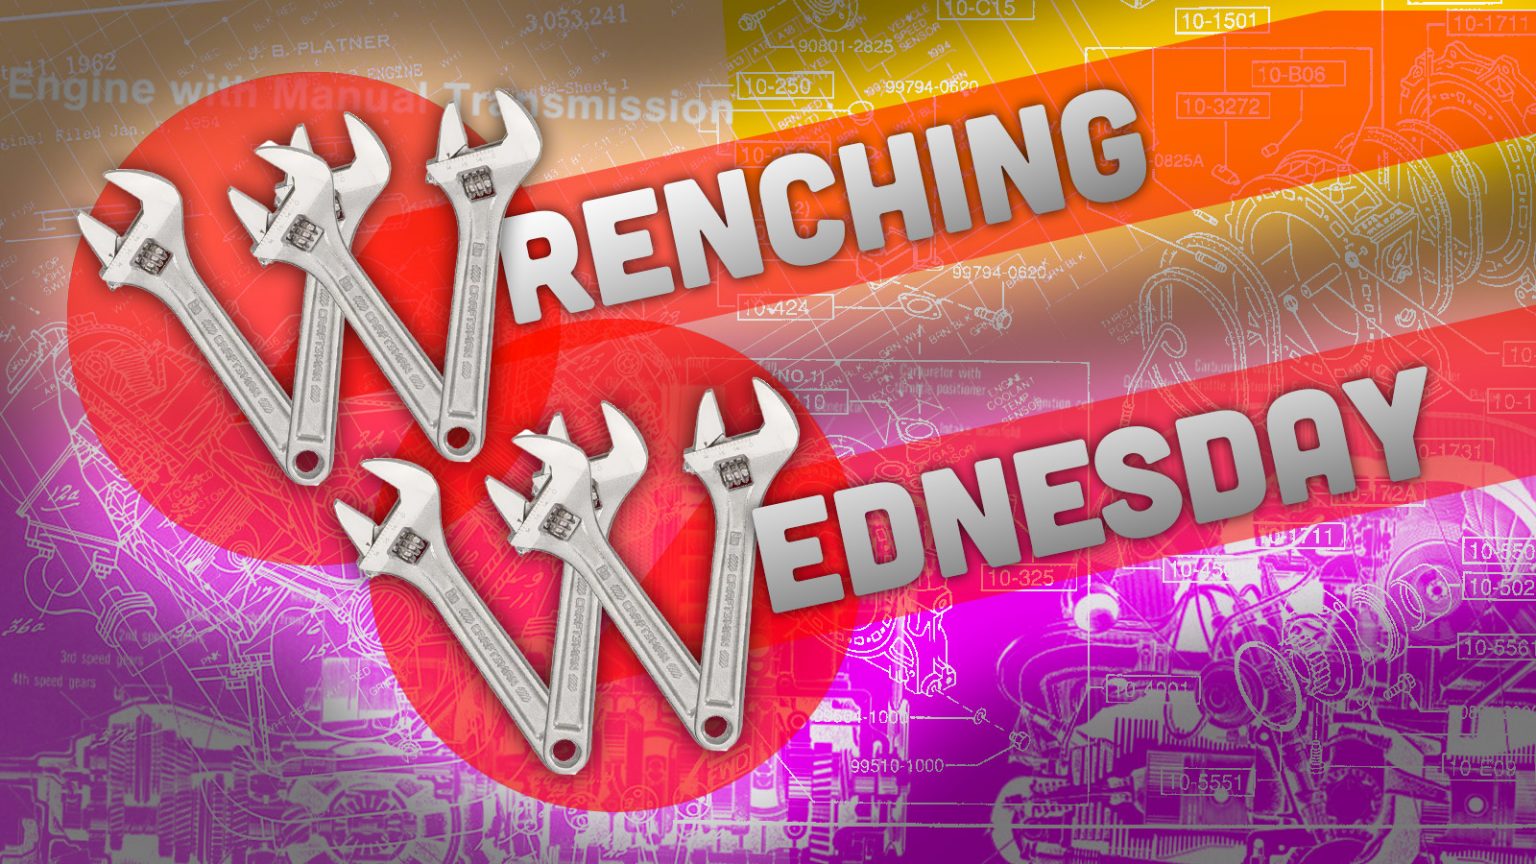 What Job Or Repair Turned Out Way Easier Than Expected? It’s Wrenching Wednesday!